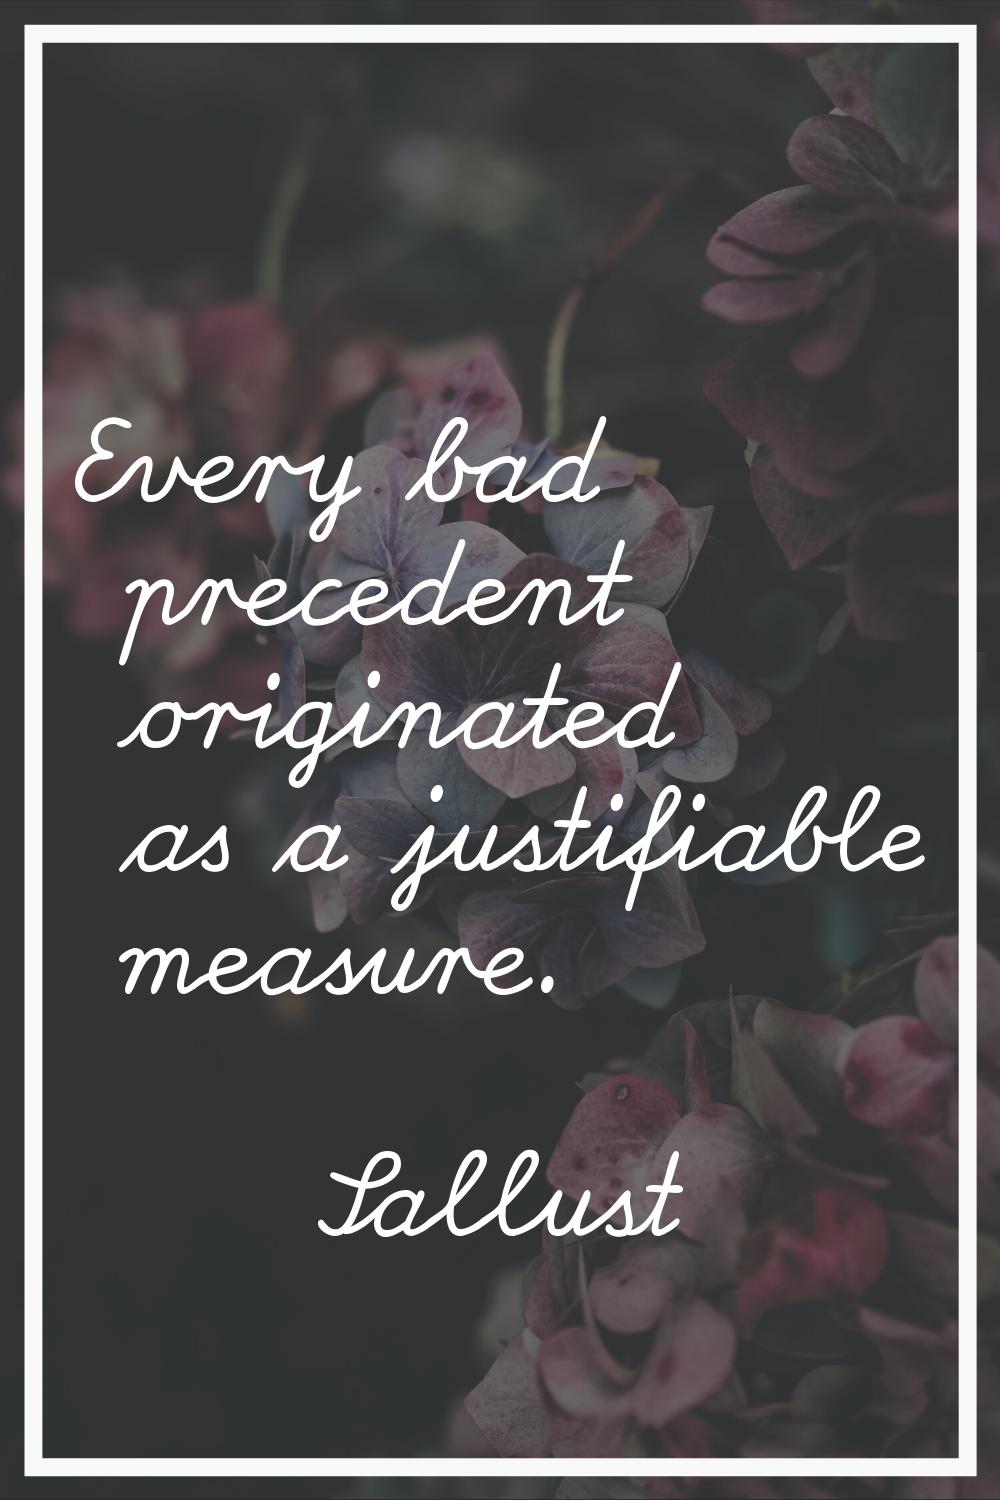 Every bad precedent originated as a justifiable measure.